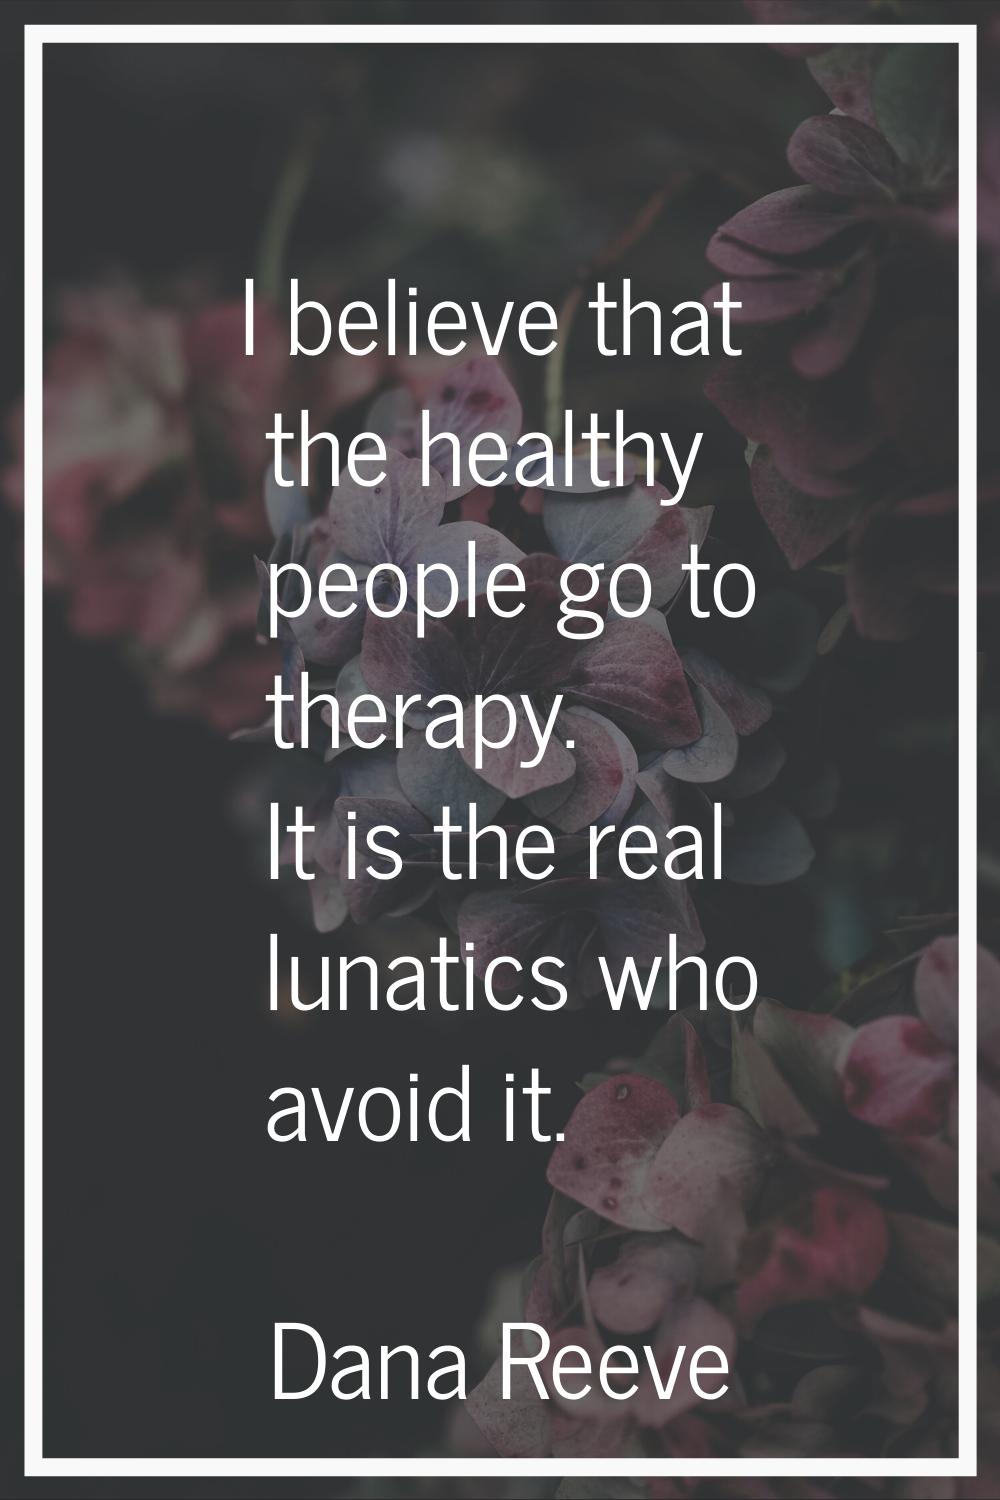 I believe that the healthy people go to therapy. It is the real lunatics who avoid it.